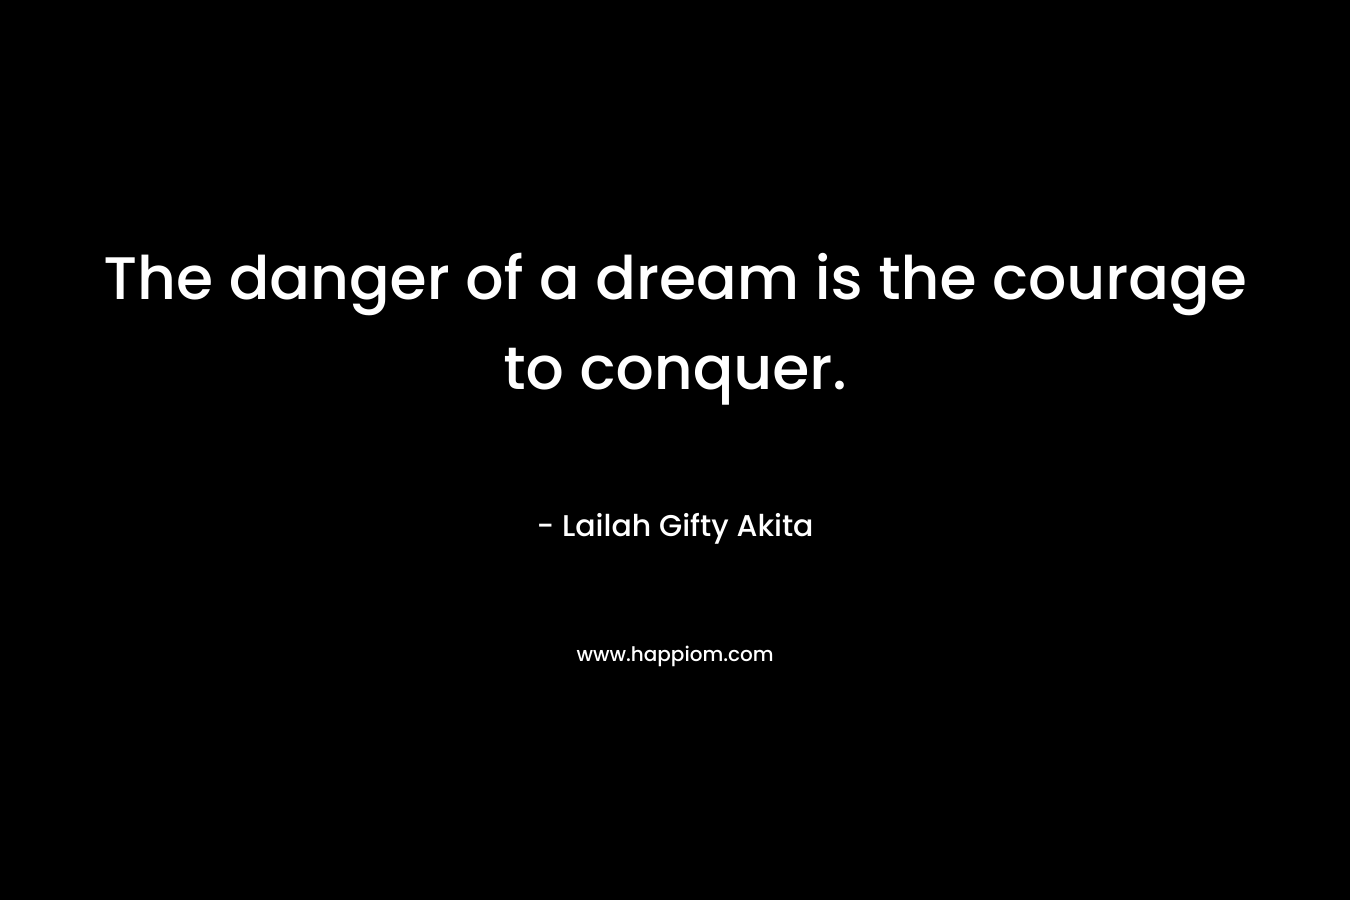 The danger of a dream is the courage to conquer.